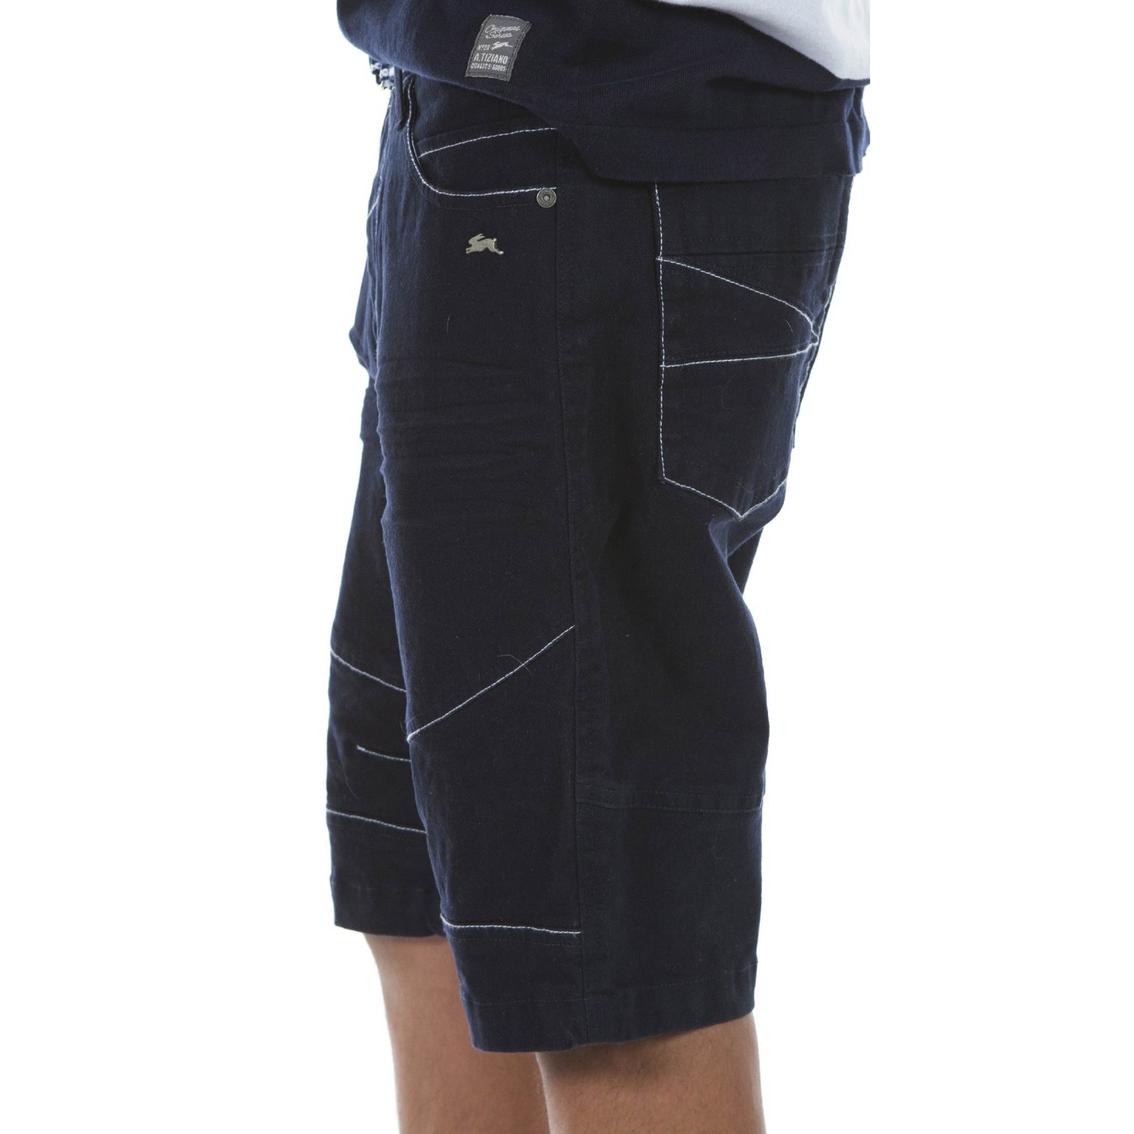 A.Tiziano Twill 15 in. Shorts - Image 4 of 4